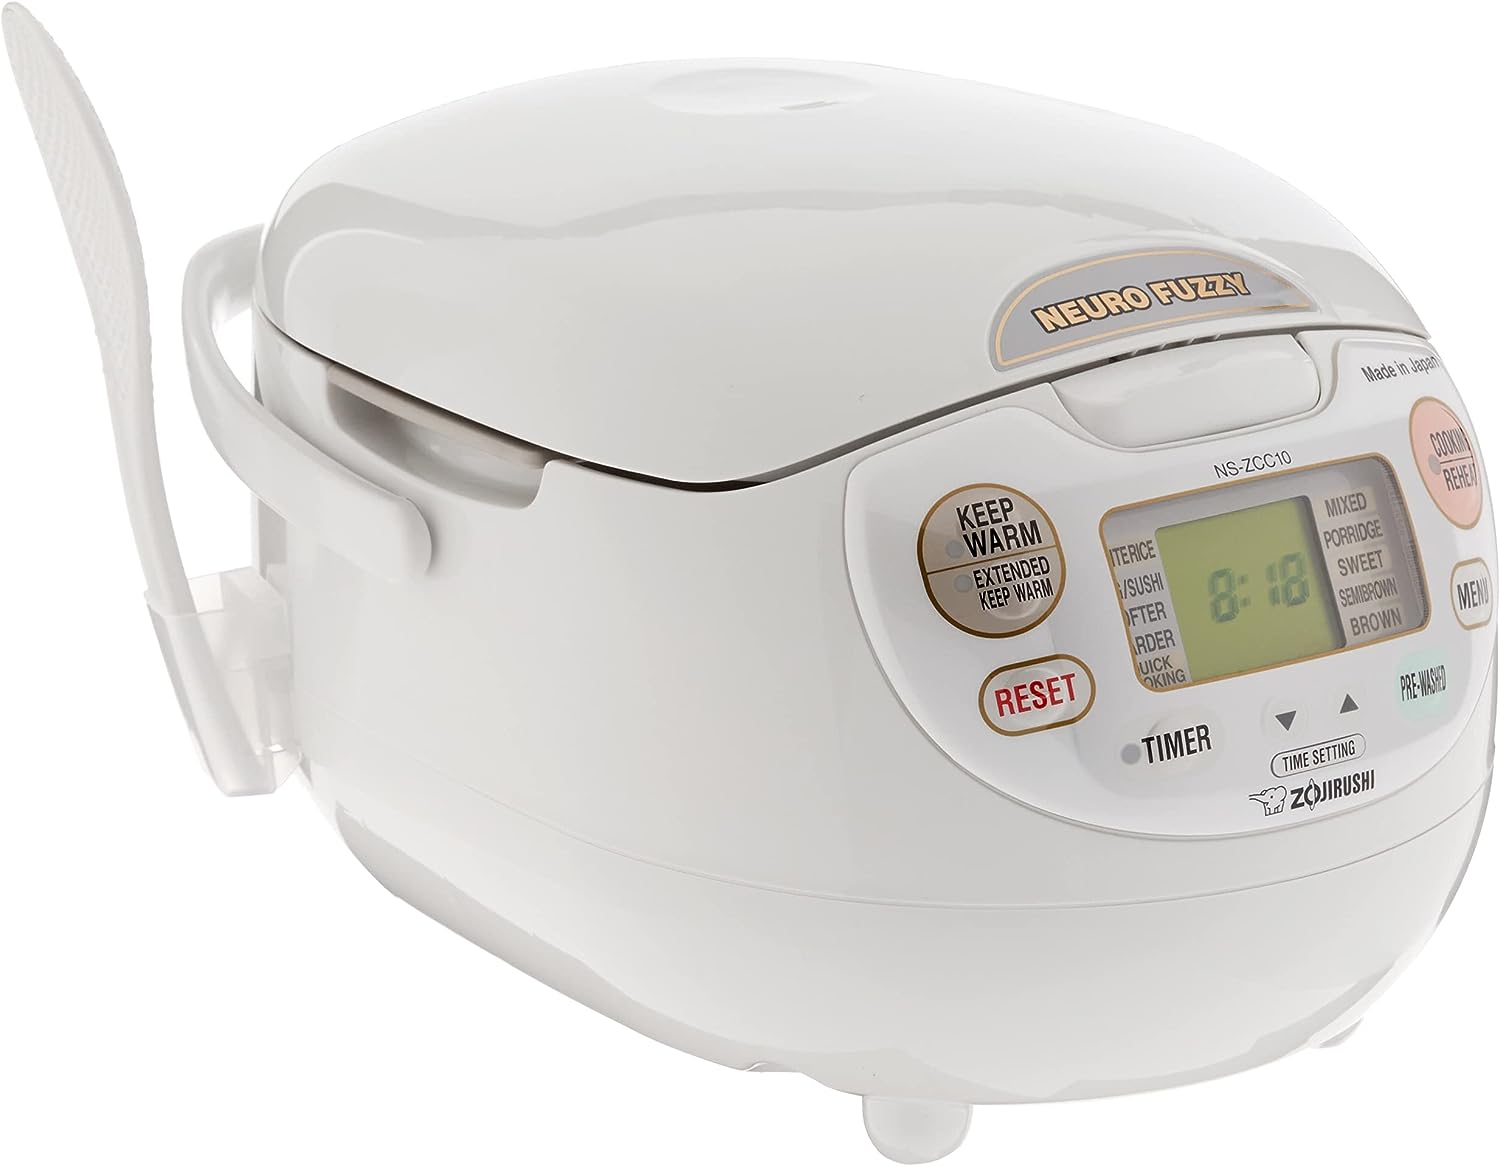 Zojirushi-NS-ZCC10-Neuro-Fuzzy-Logic-Cooker-5.5-cup-uncooked-rice-cooker